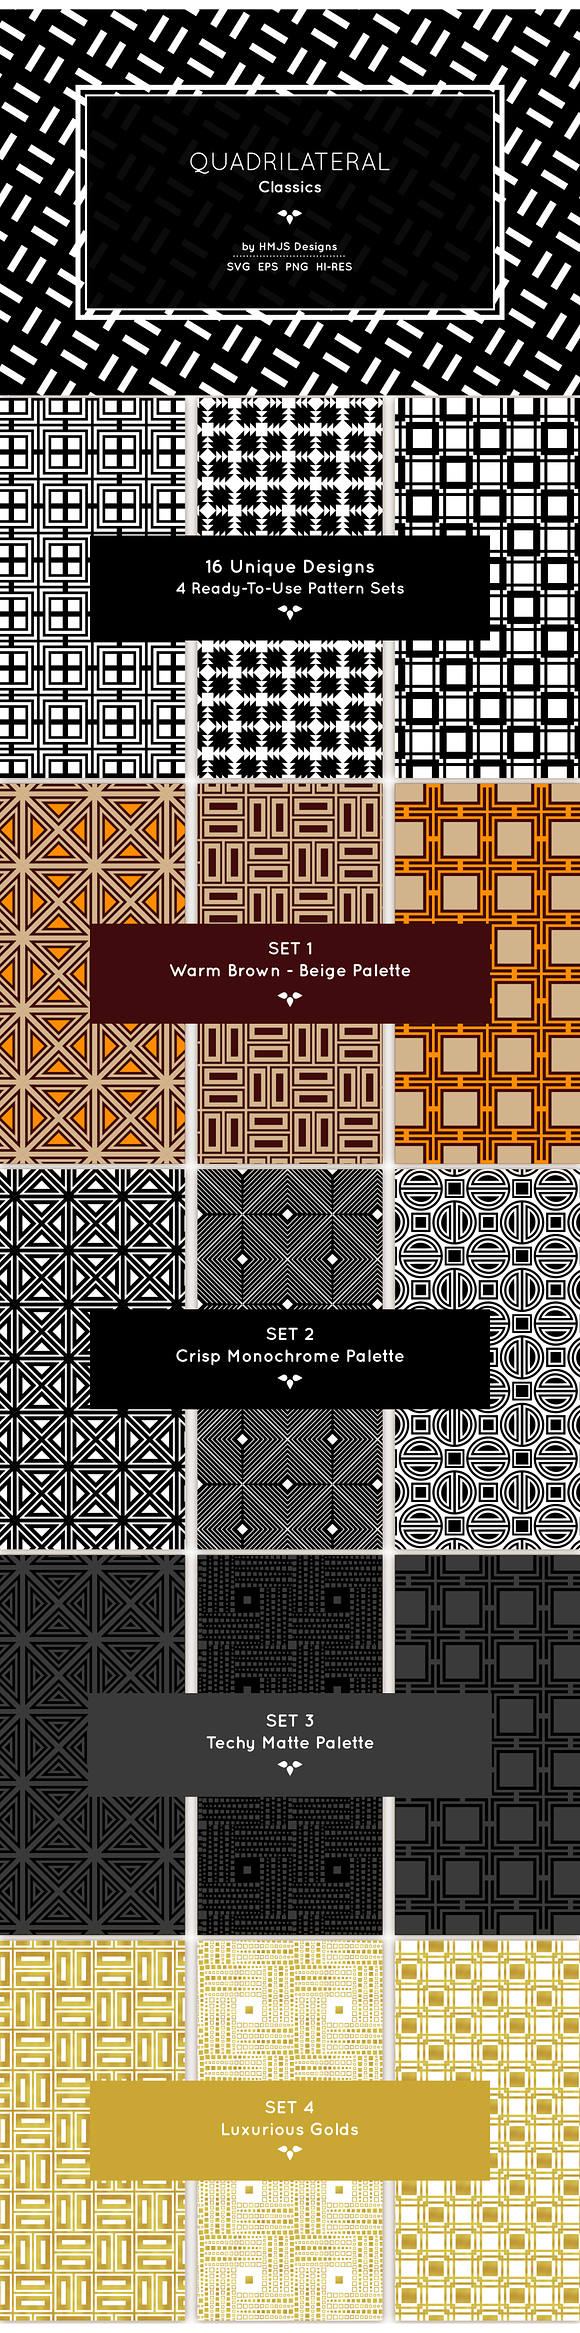 Square Patterns in Patterns - product preview 7